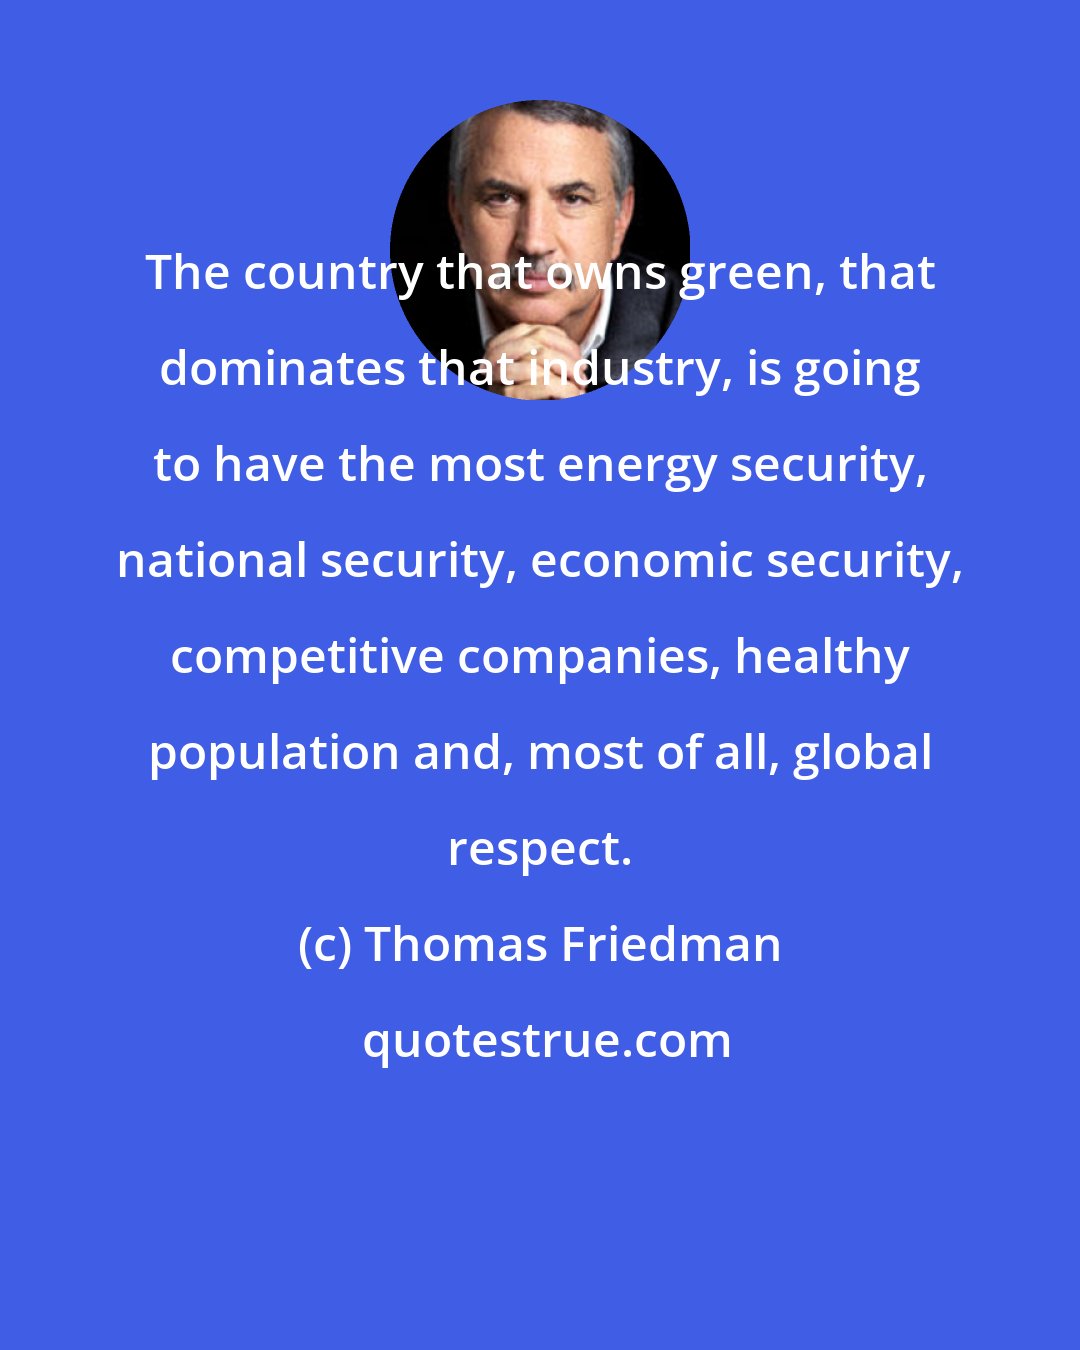 Thomas Friedman: The country that owns green, that dominates that industry, is going to have the most energy security, national security, economic security, competitive companies, healthy population and, most of all, global respect.